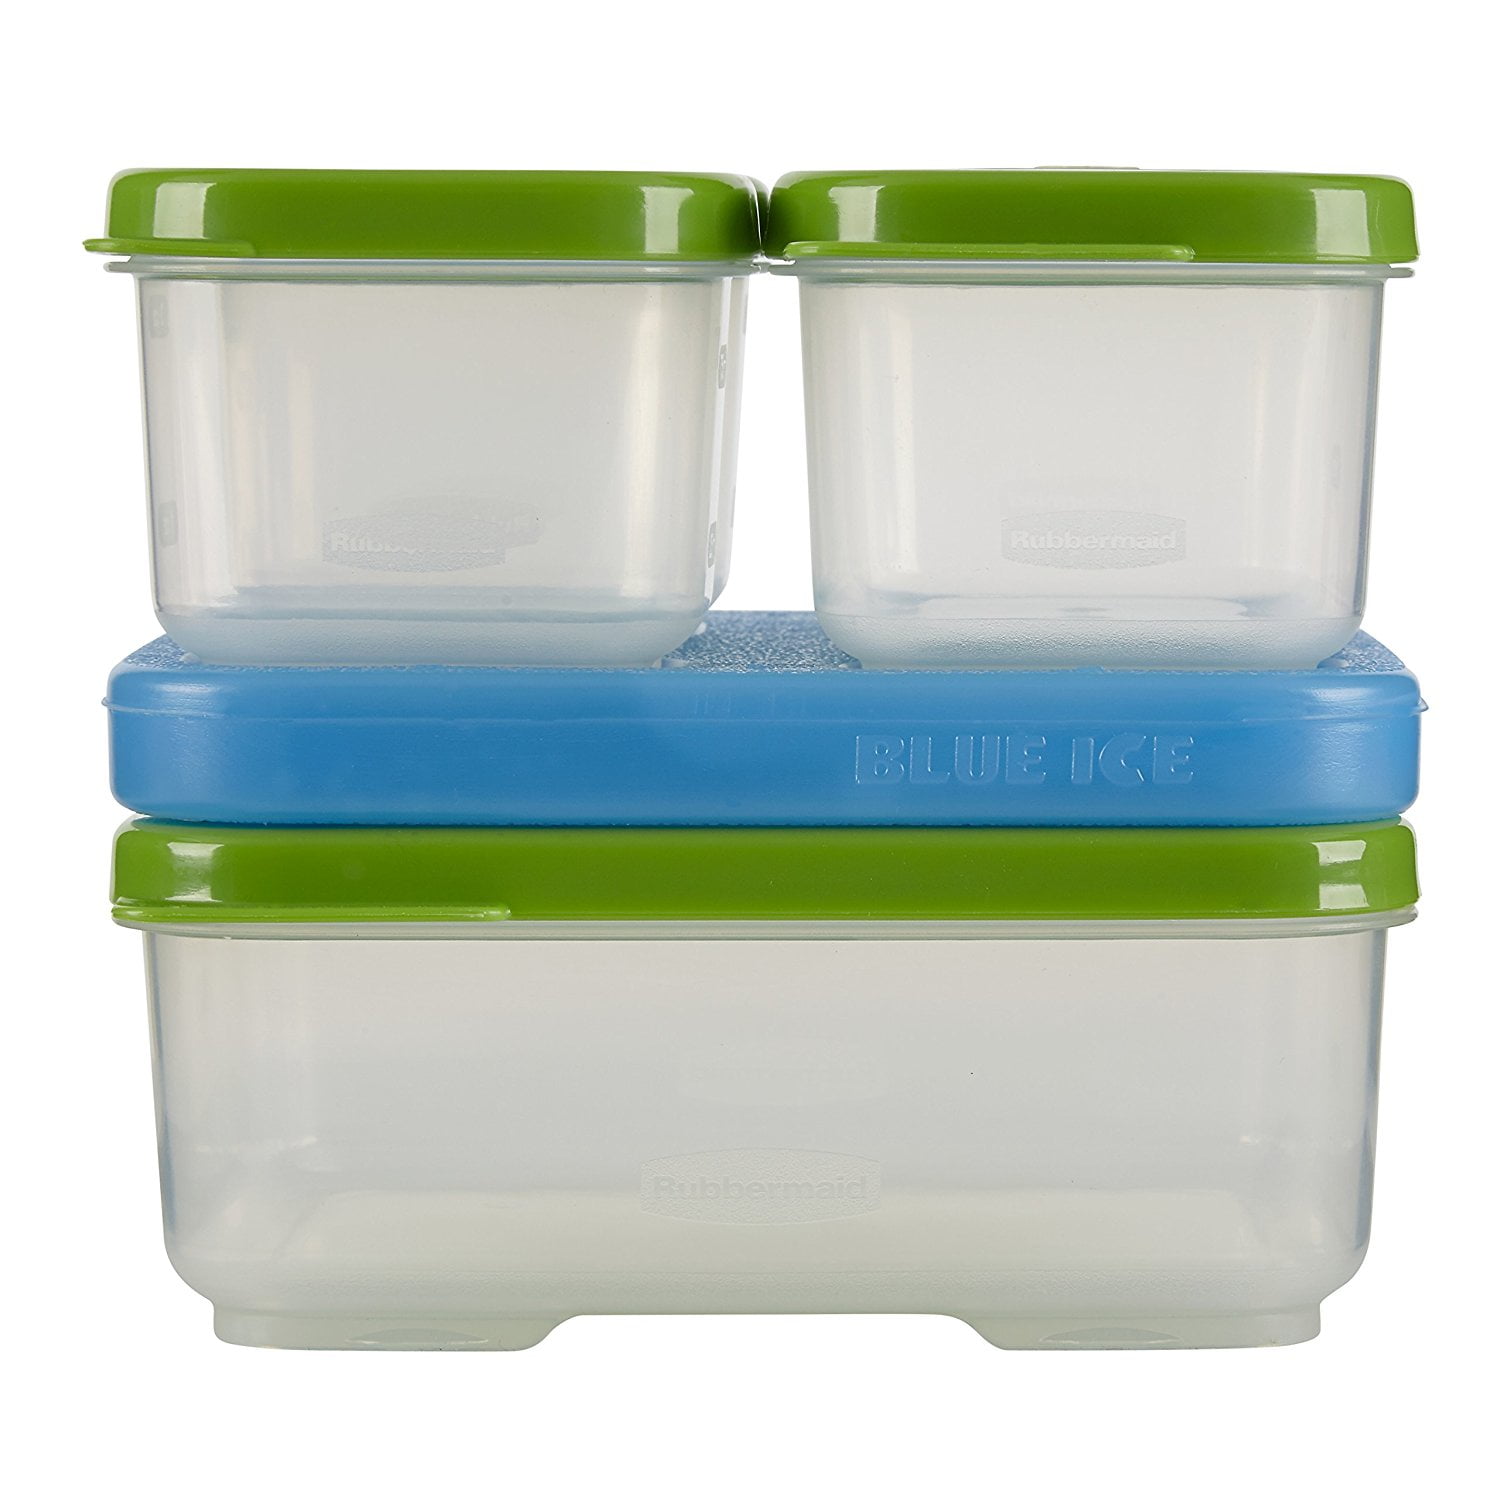 Rubbermaid® Take Alongs Sandwich Containers, 3 pk - Fred Meyer